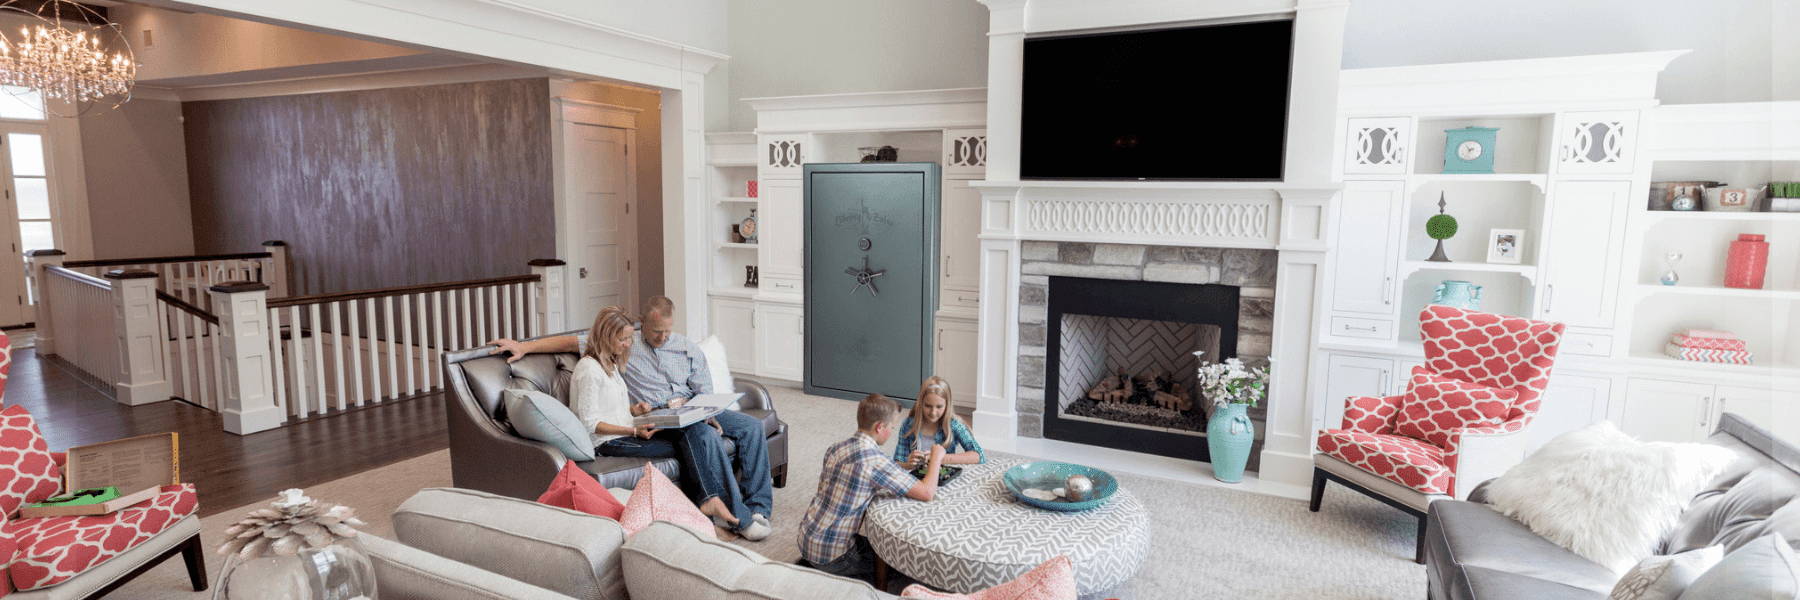 Family sitting in family room with safe in corner